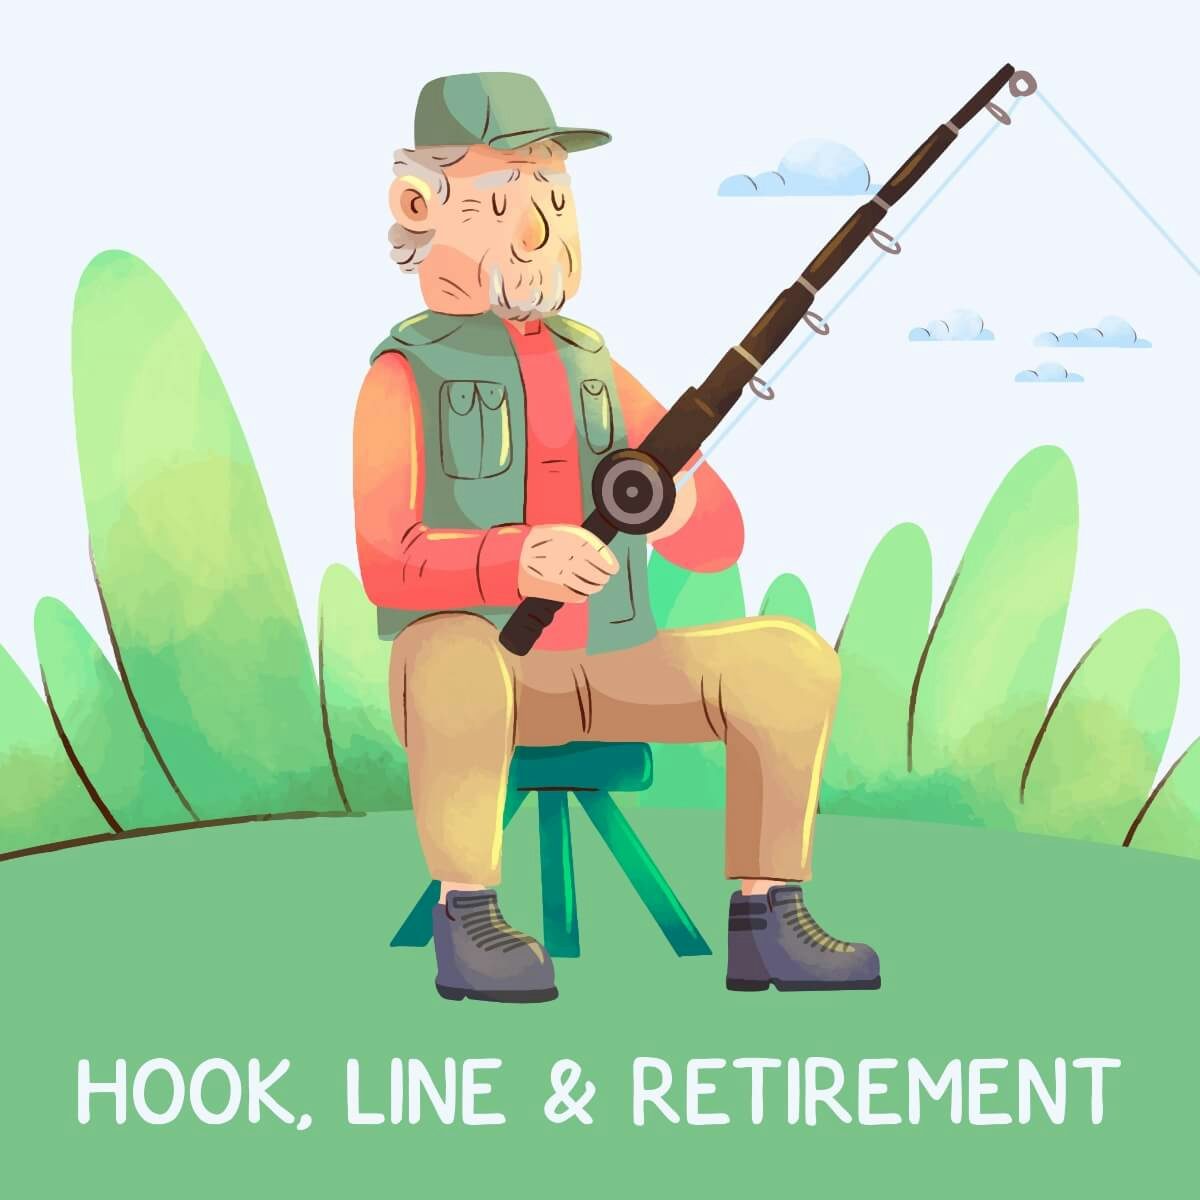 Card Hook line and retirement